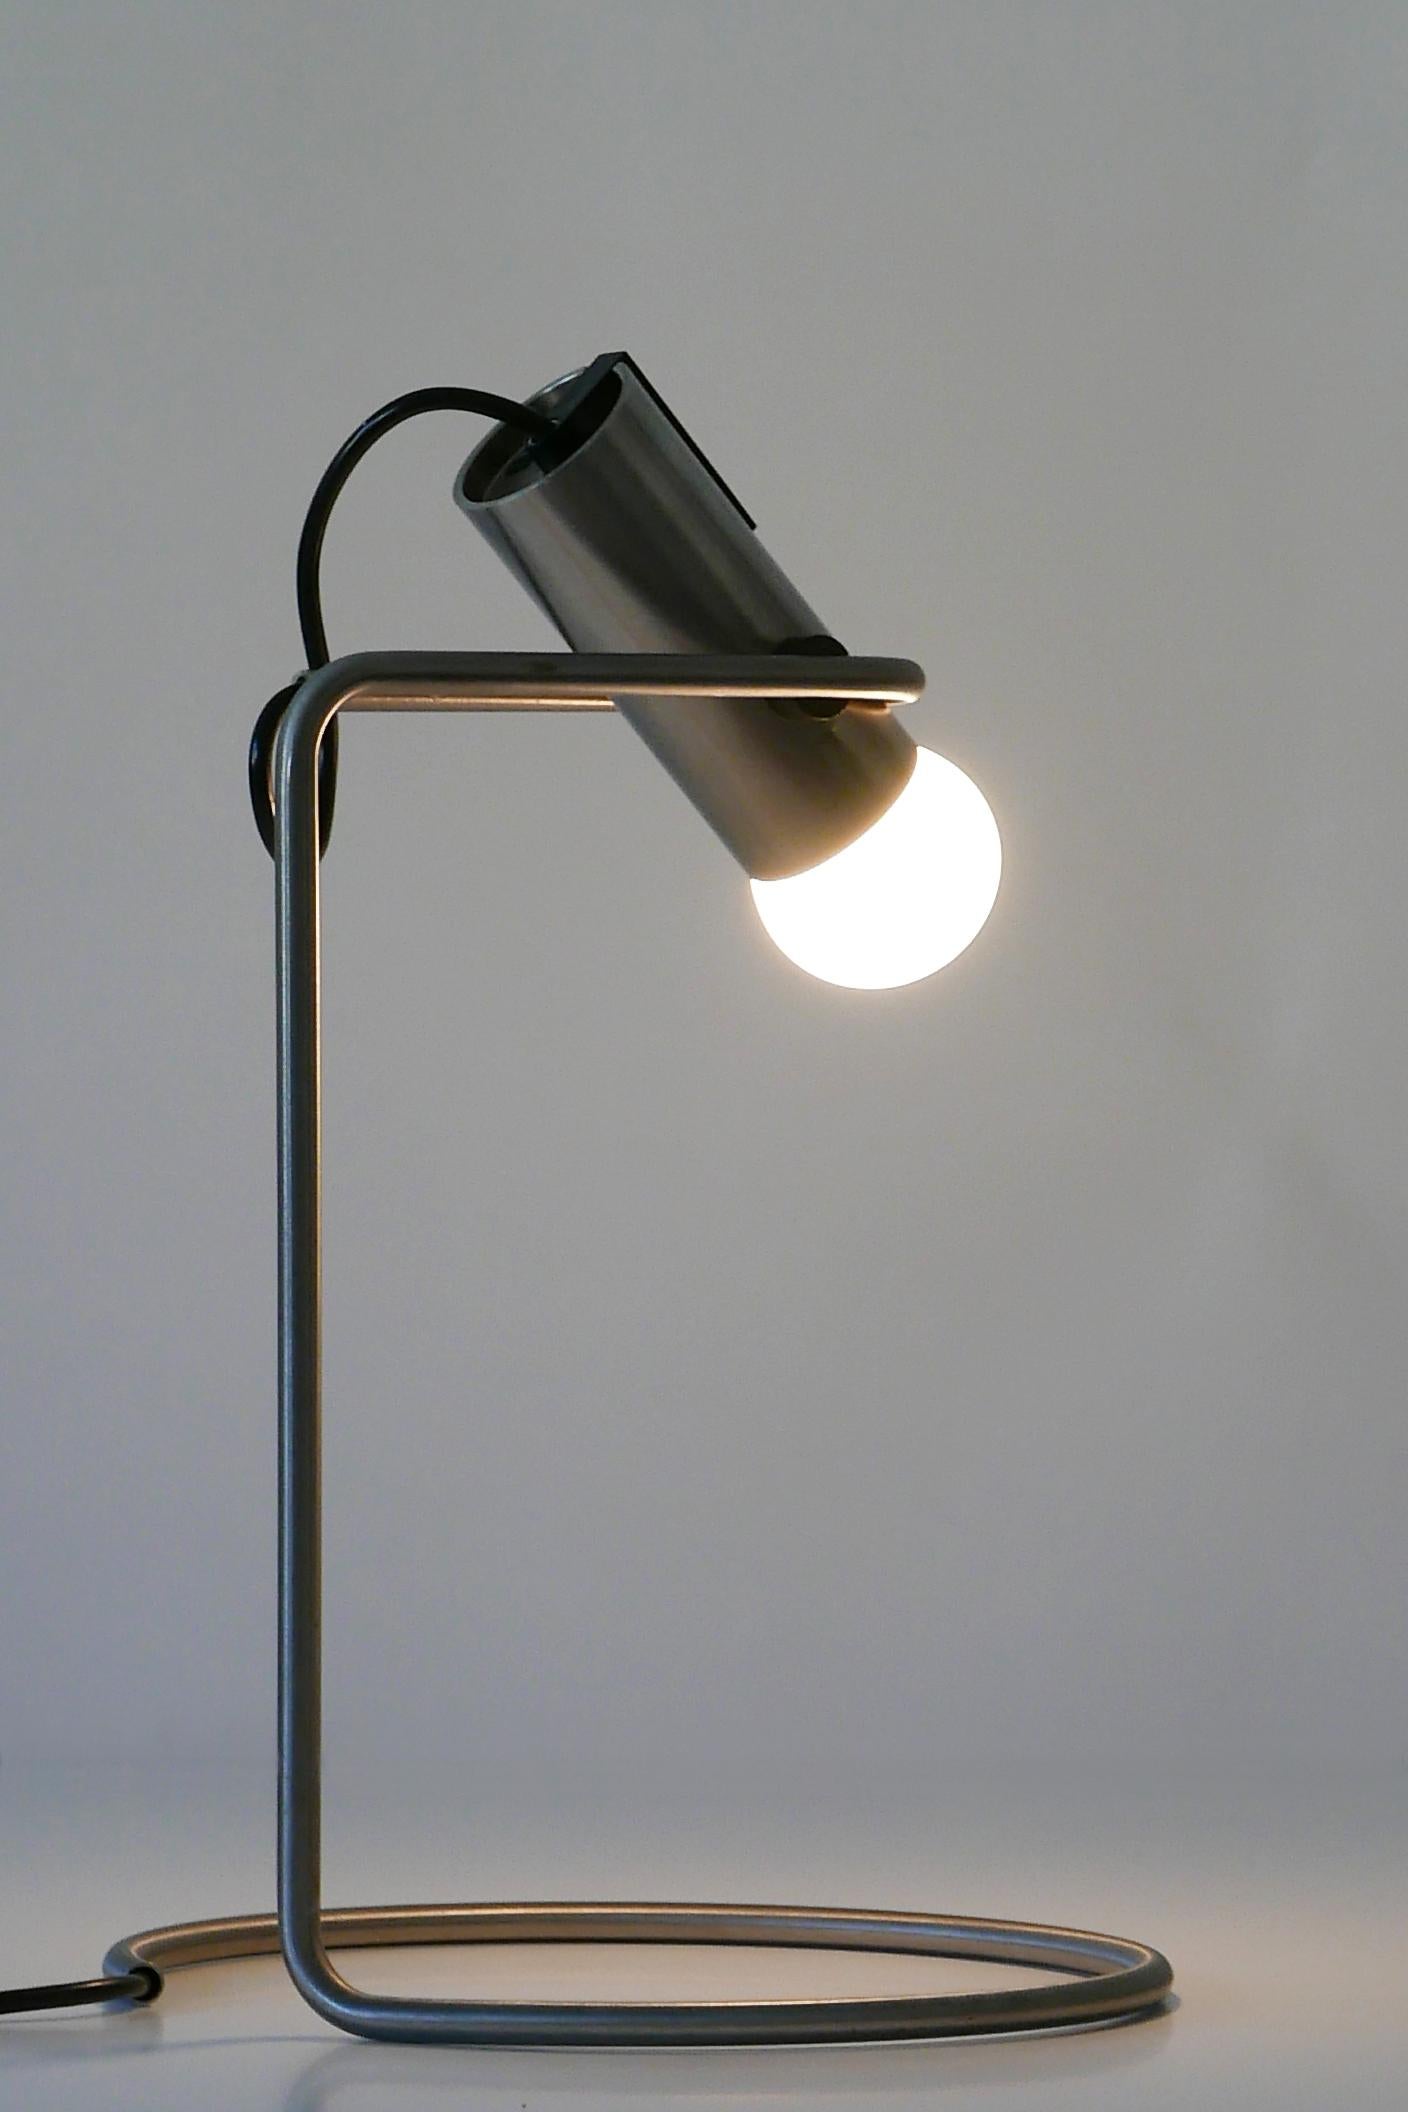 Italian Exceptional Minimalistic Mid-Century Modern Table Lamp or Desk Light, 1960s For Sale